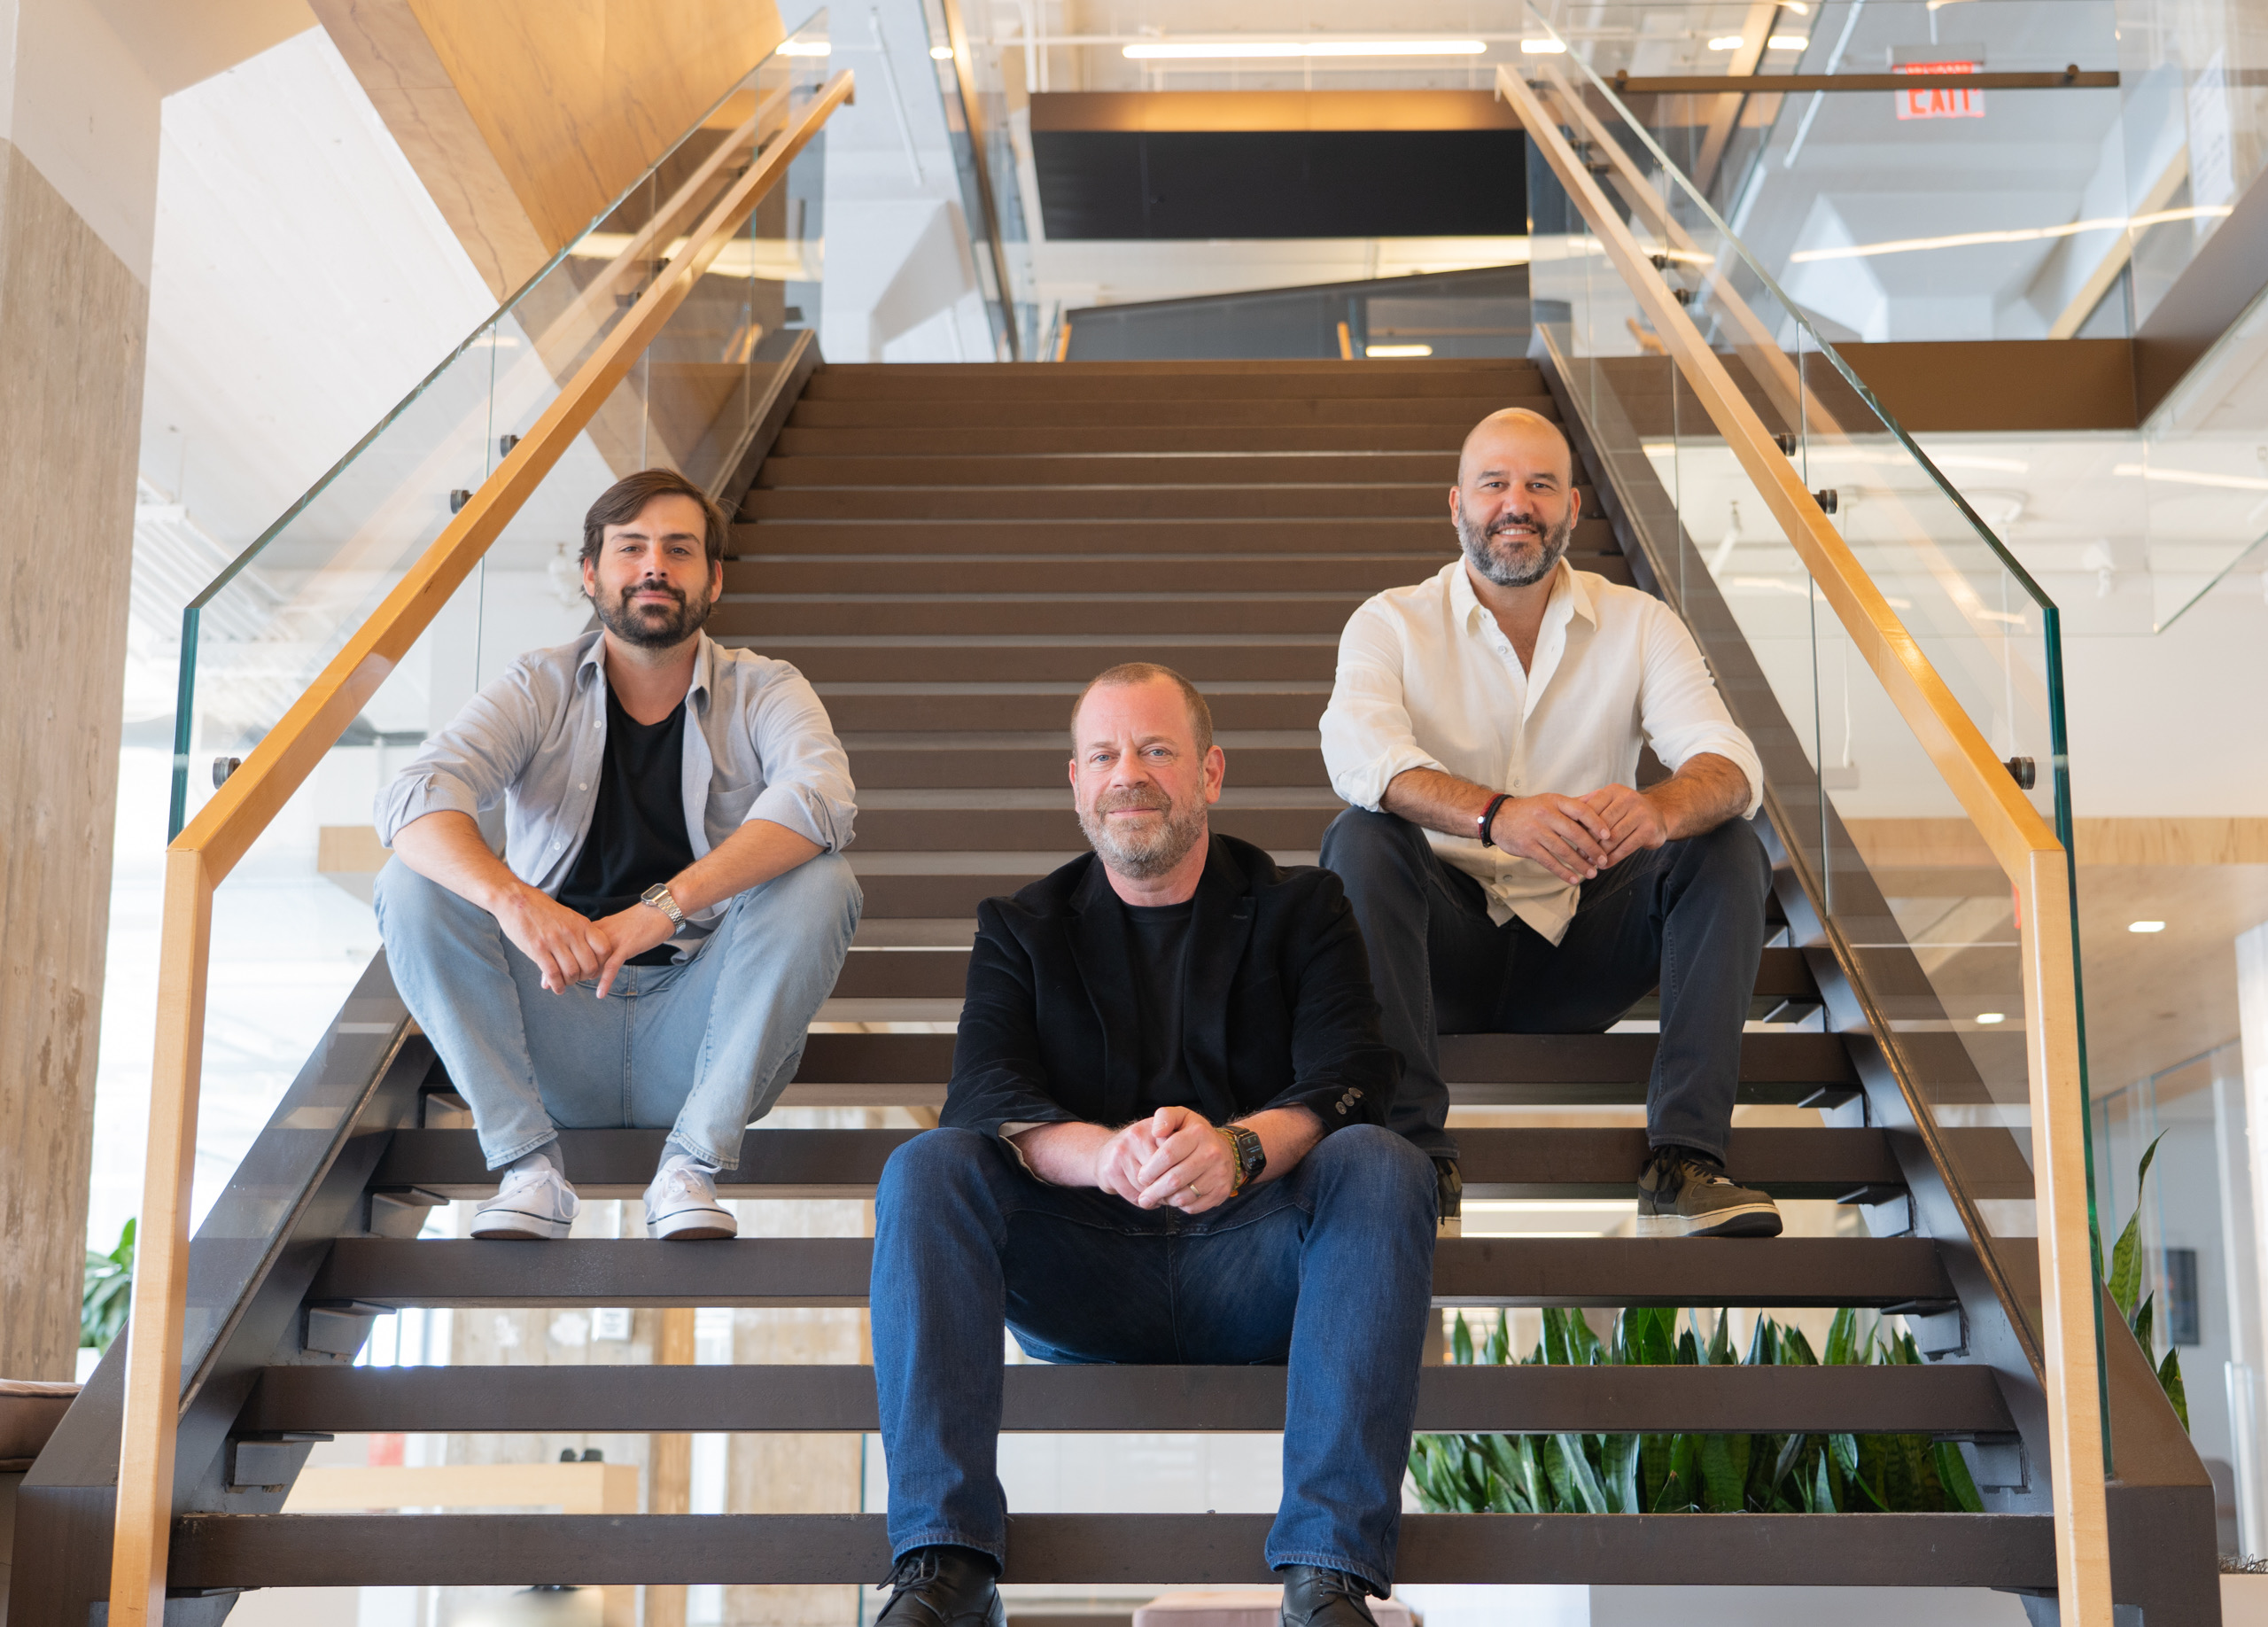 In Continued Expansion, Horizon Media Acquires Experiential Transformation Pioneer First Tube – the Leading Live Digital Experience Platform for Brands